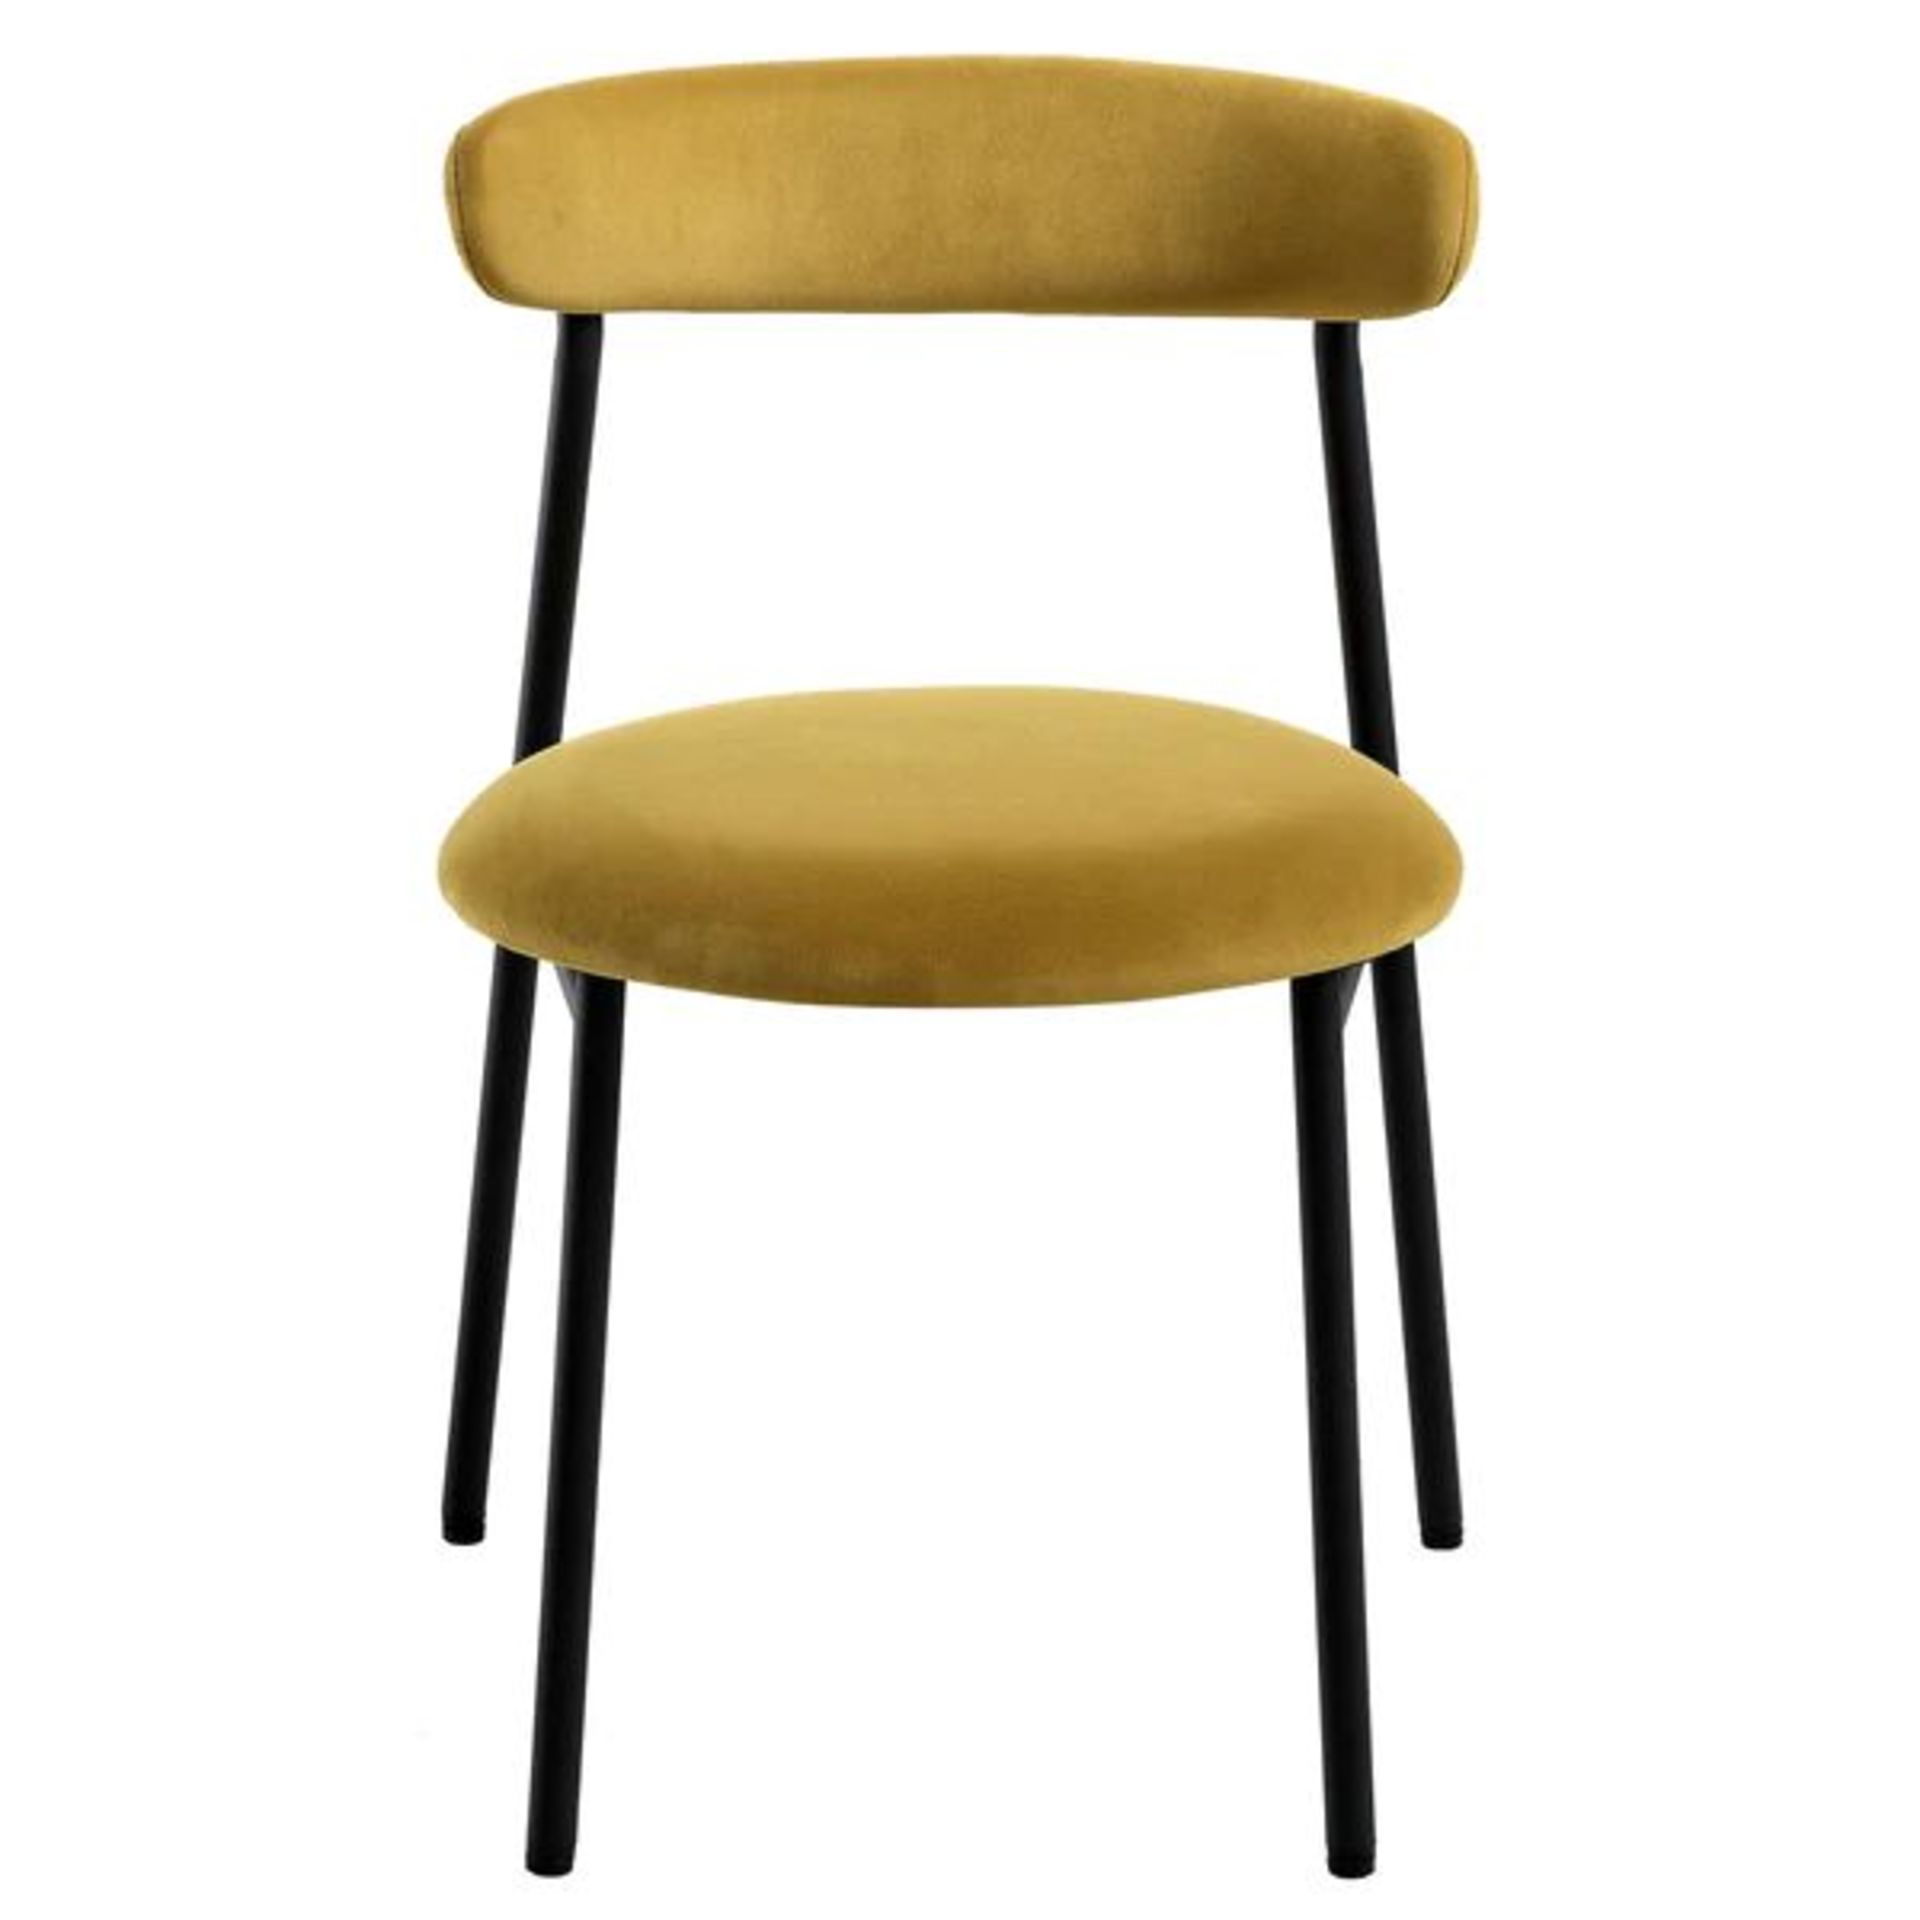 Donna Set of 2 Mustard Yellow Velvet Dining Chairs. -ER31. RRP £209.99. With slightly curved back - Bild 2 aus 2